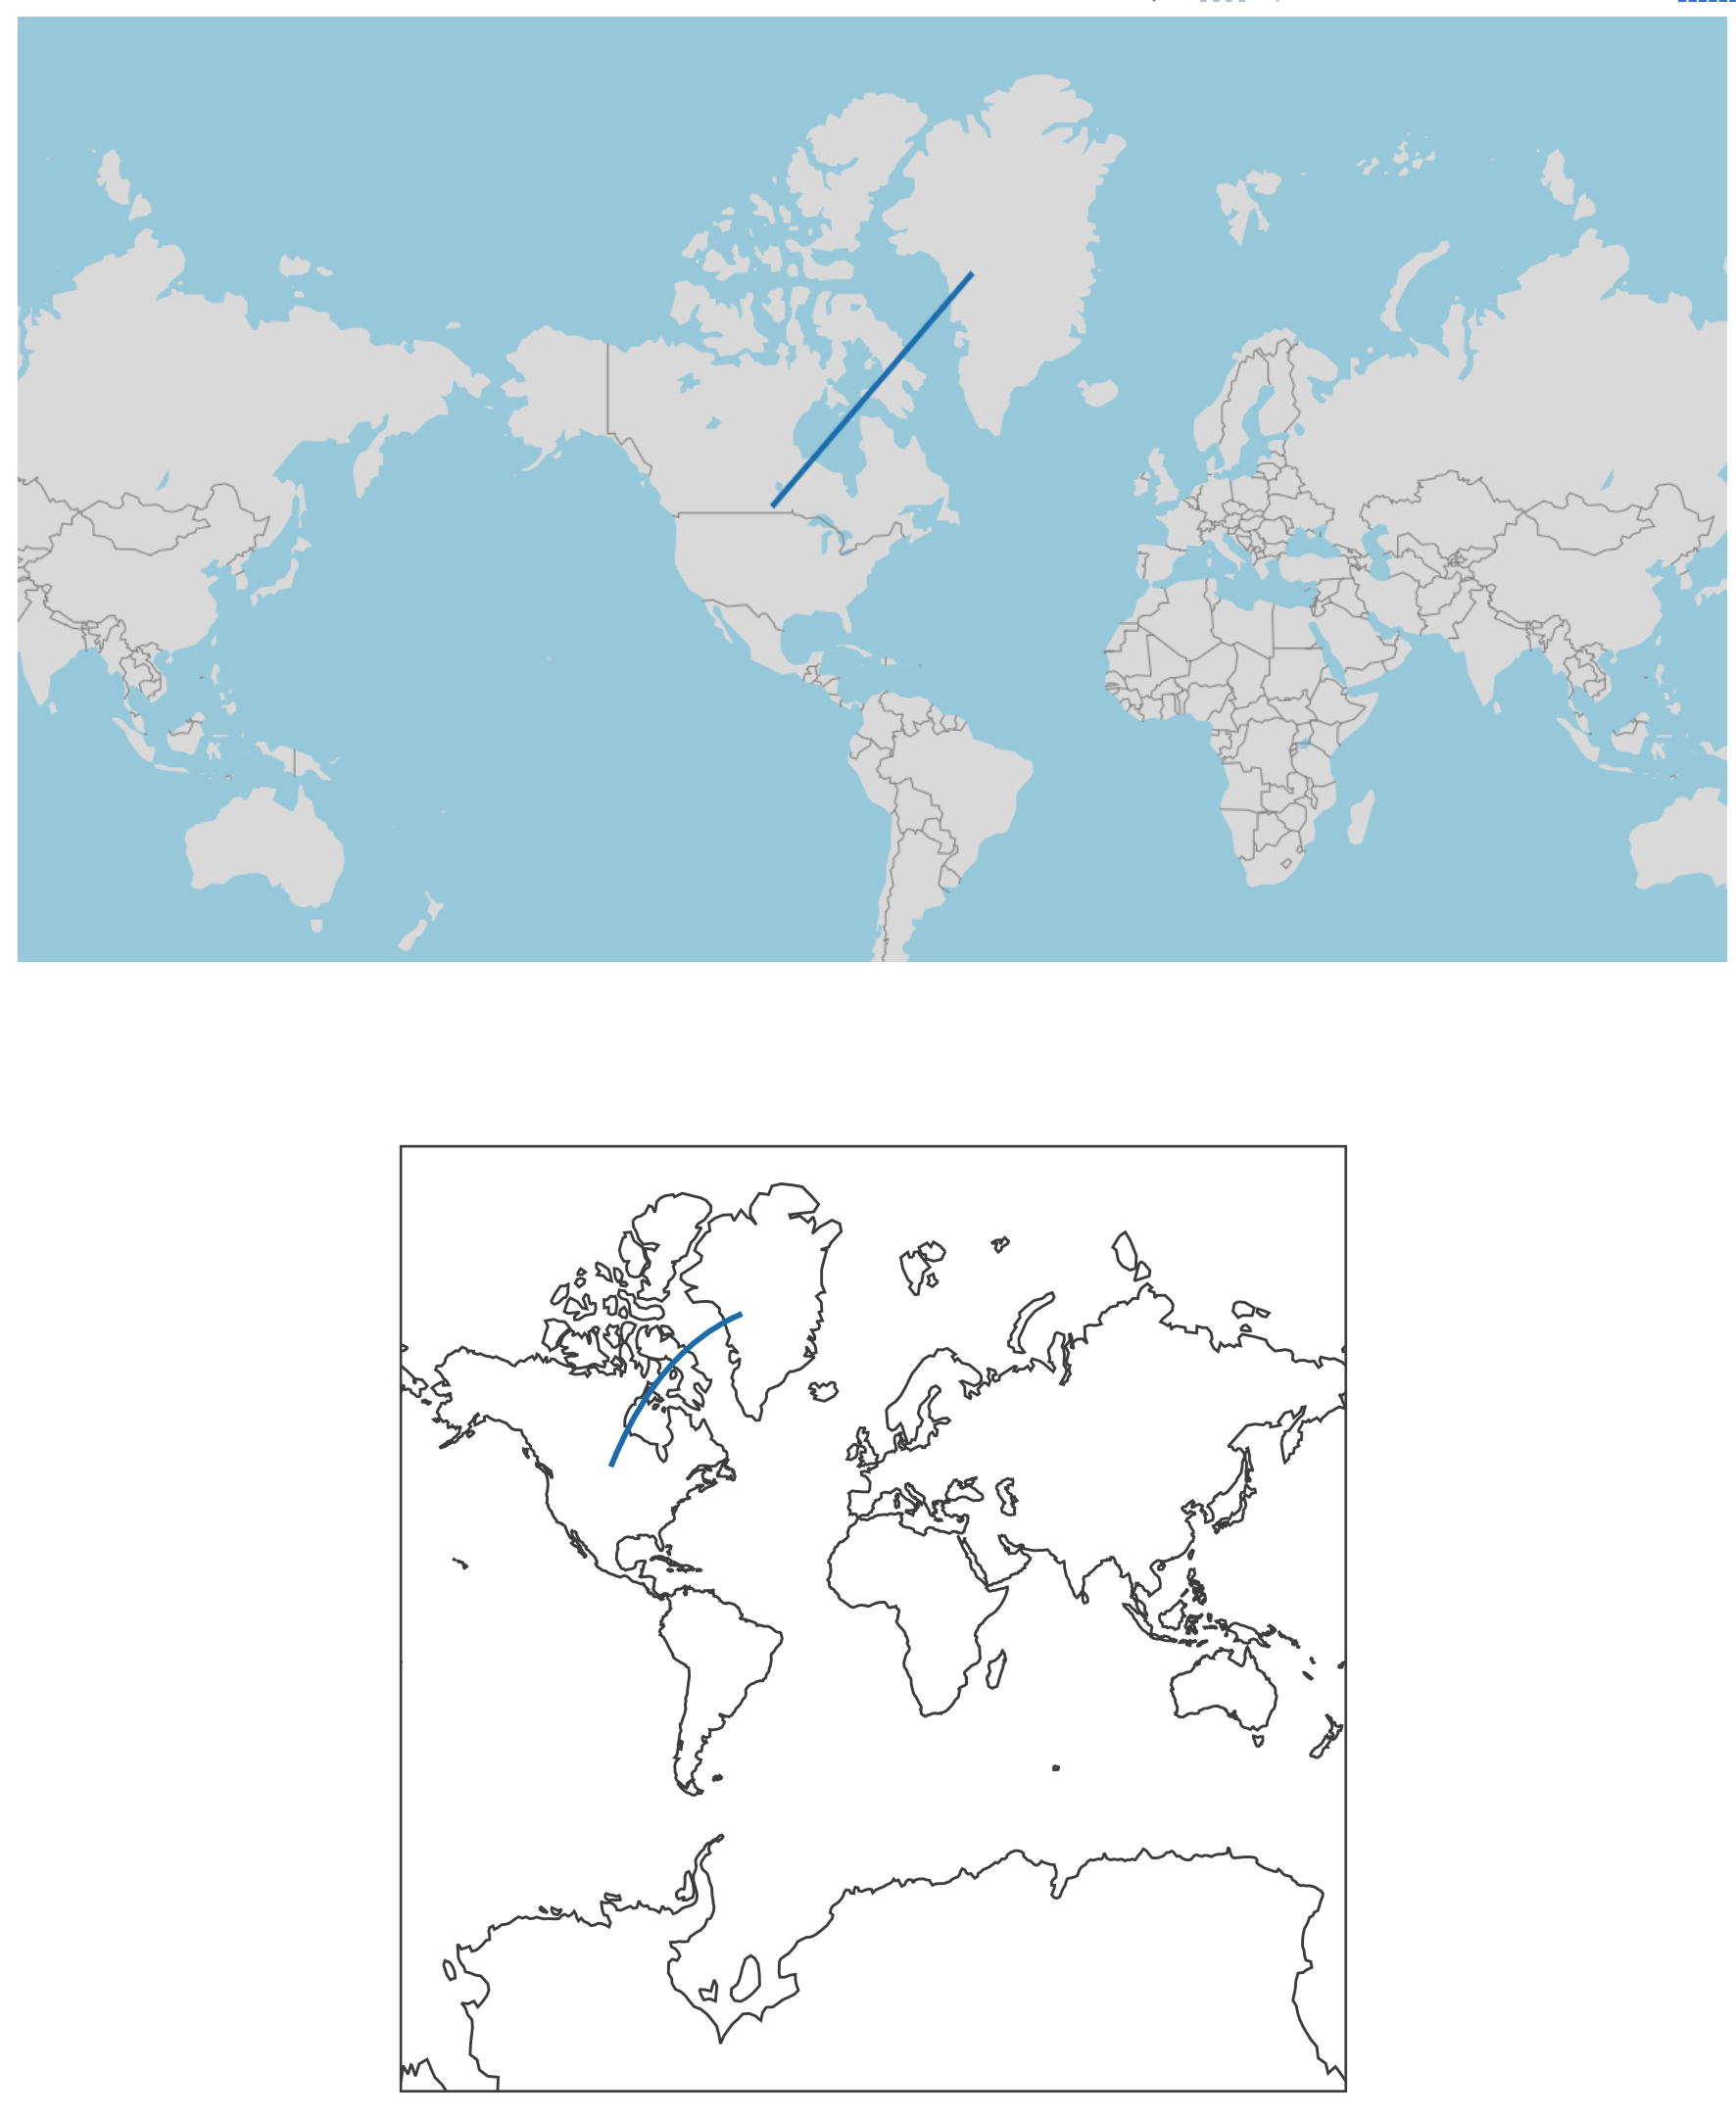 Three different ways to render a map. On the top left is plotly’s default cartesian coordinate system, on the top right is plotly’s custom geographic layout, and on the bottom is mapbox.